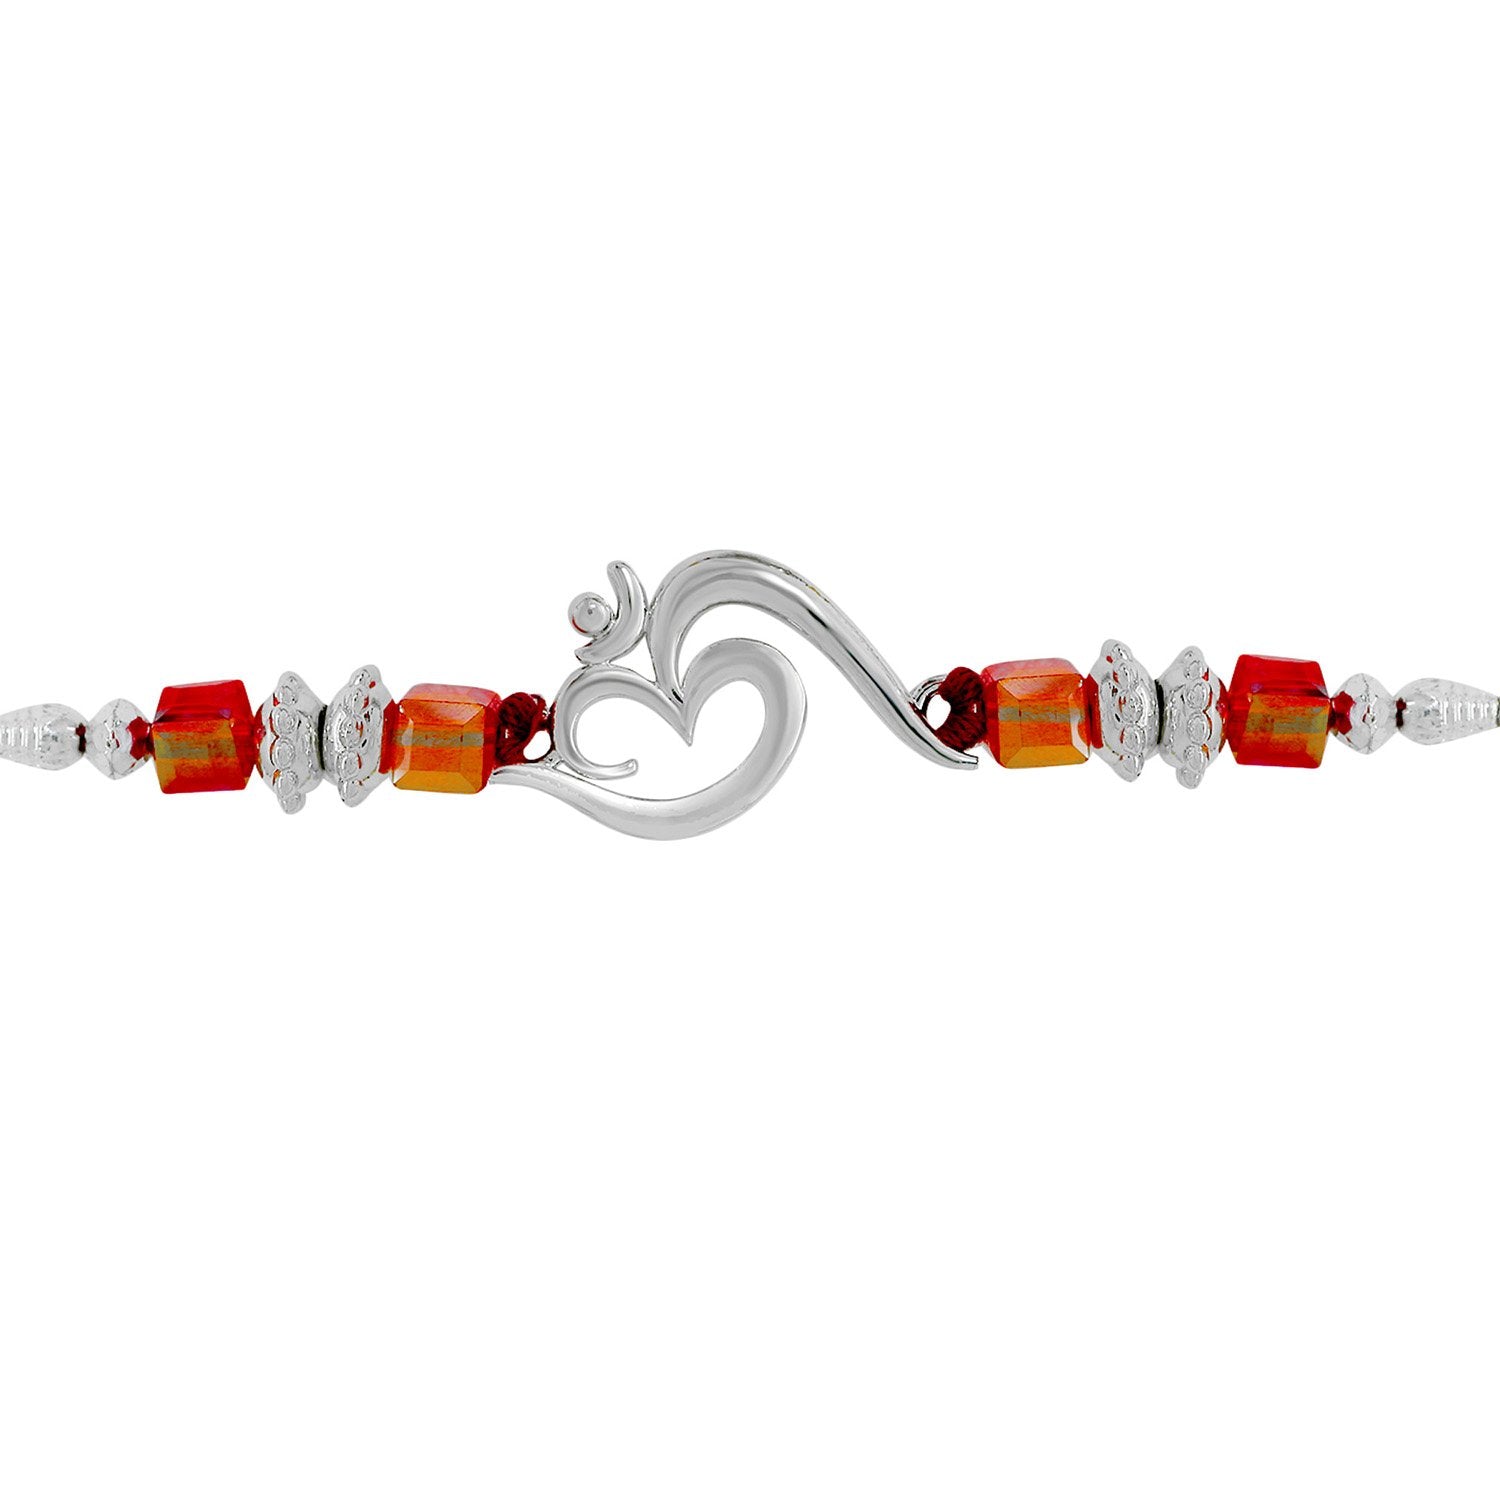 Mahi Red Colored Silver OM with Crystals and Beads Rakhi (Bracelet) BR1100547R